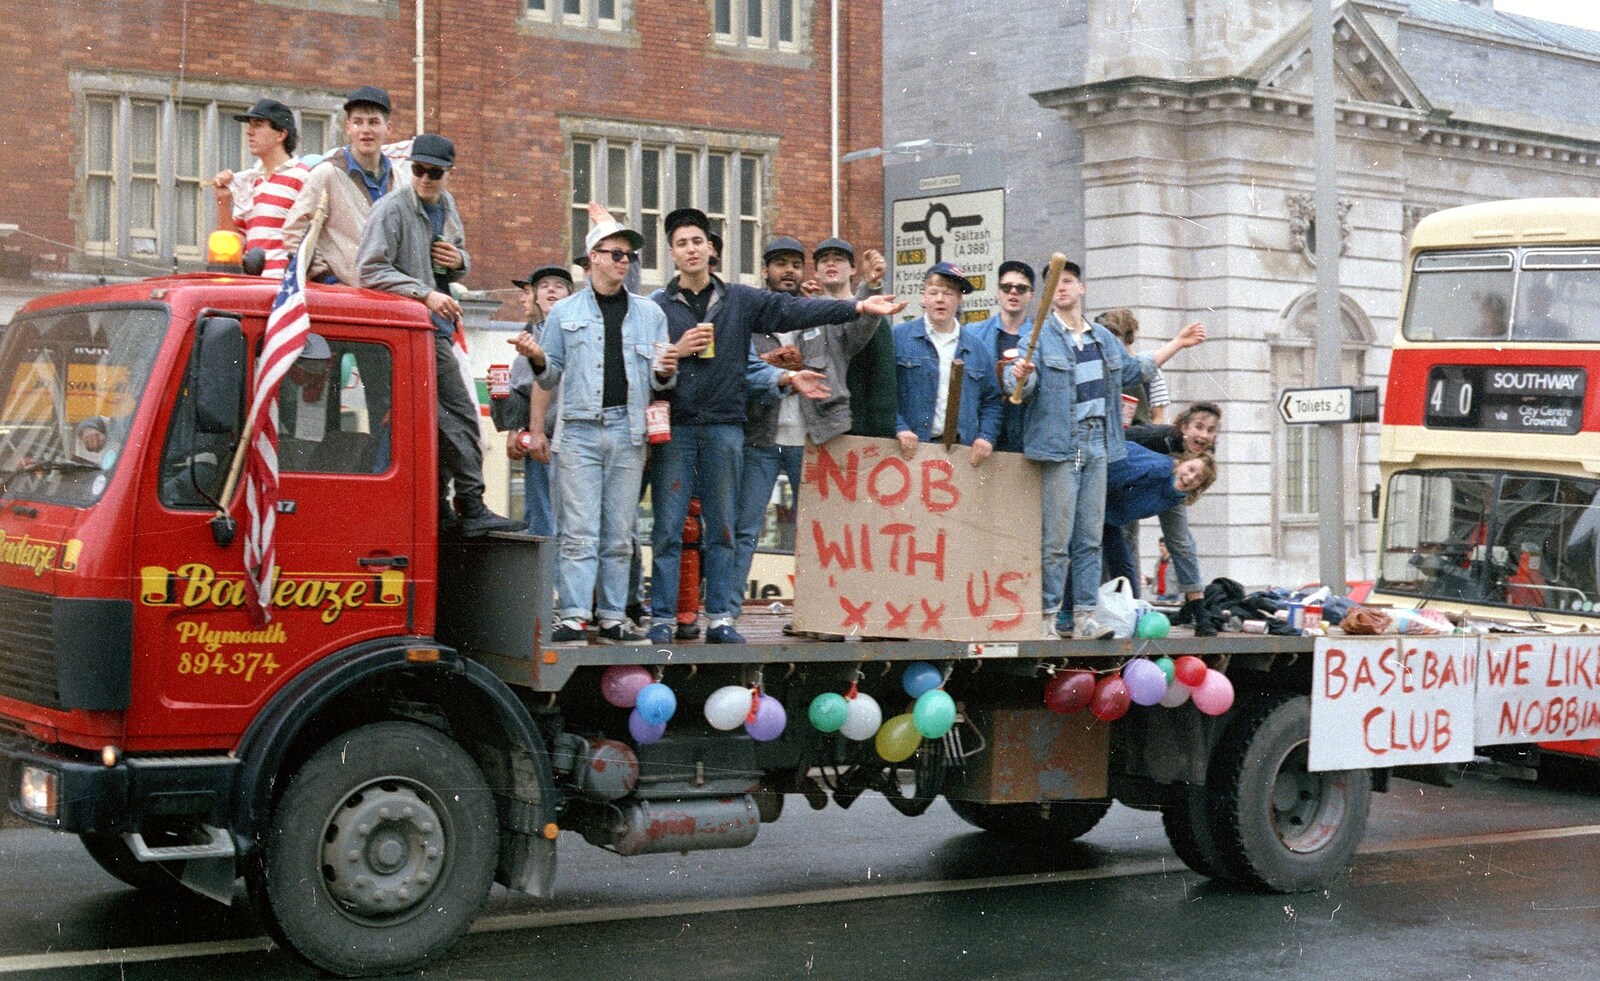 The baseball club say 'Nob with us' from Uni: The PPSU Pirate RAG Parade, Plymouth, Devon - 14th February 1987